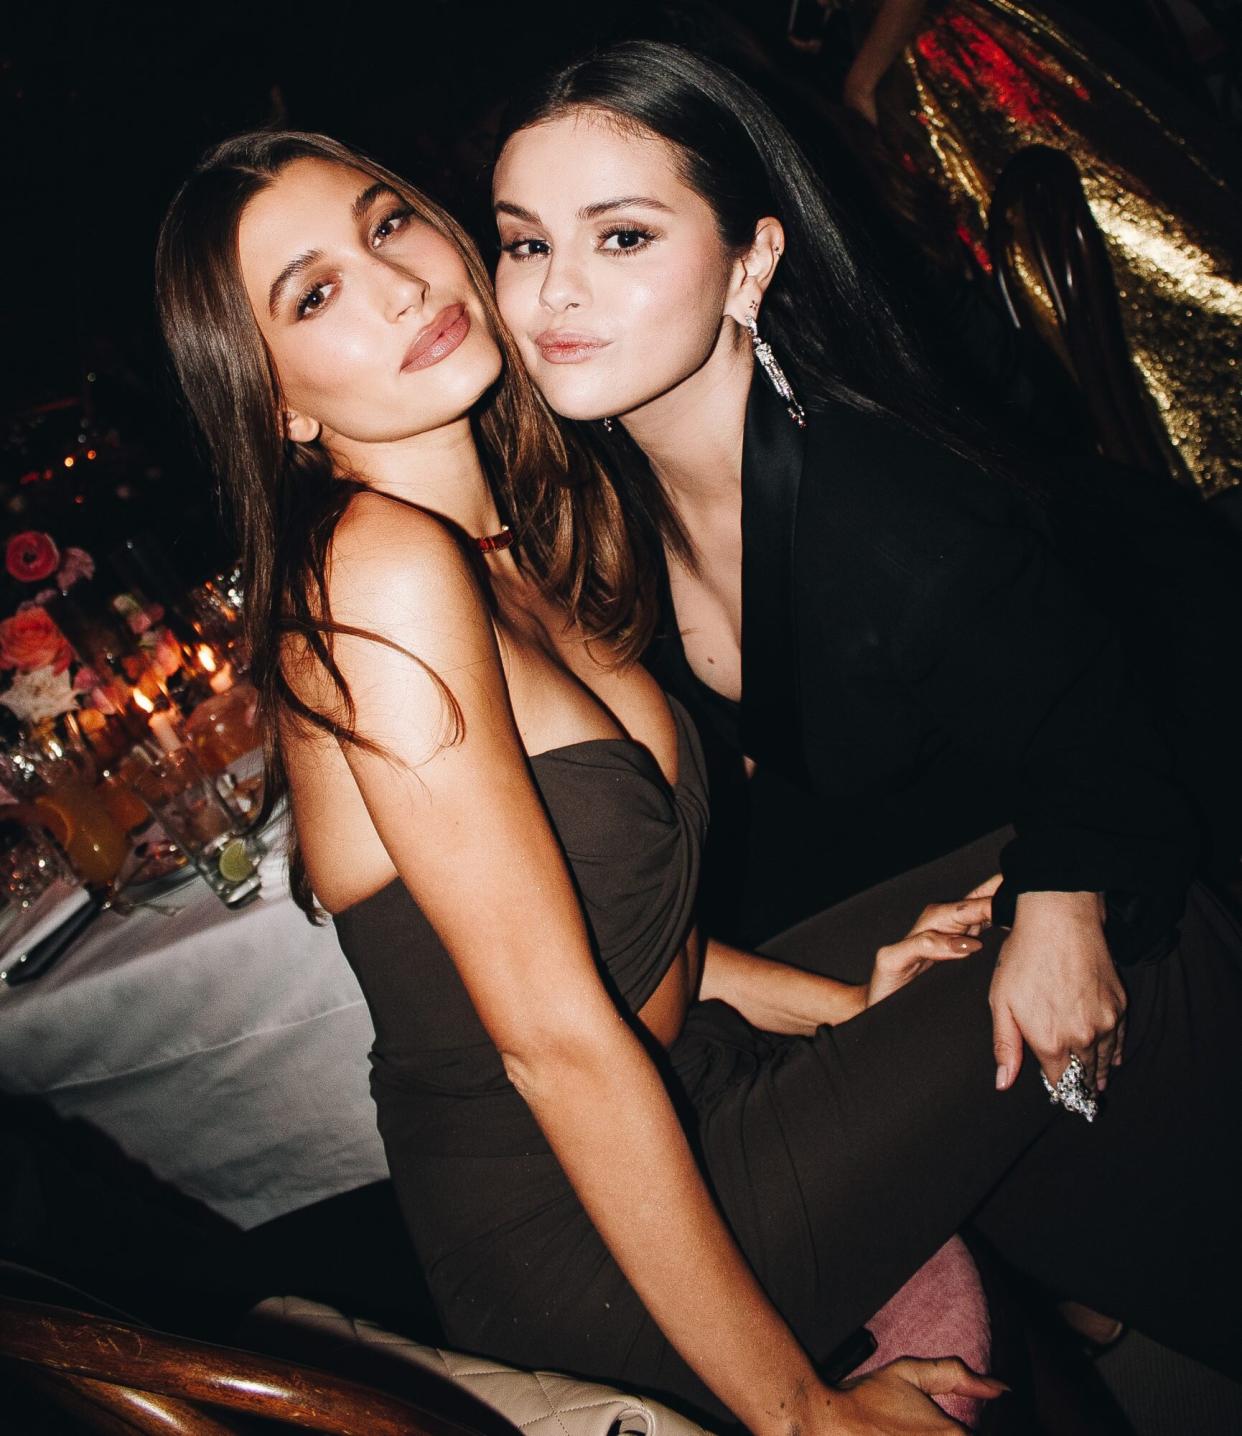 Caption: Hailey Bieber and Selena Gomez attend the Academy Museum of Motion Pictures 2nd Annual Gala, Presented by Rolex Photo Credit: Tyrell Hampton